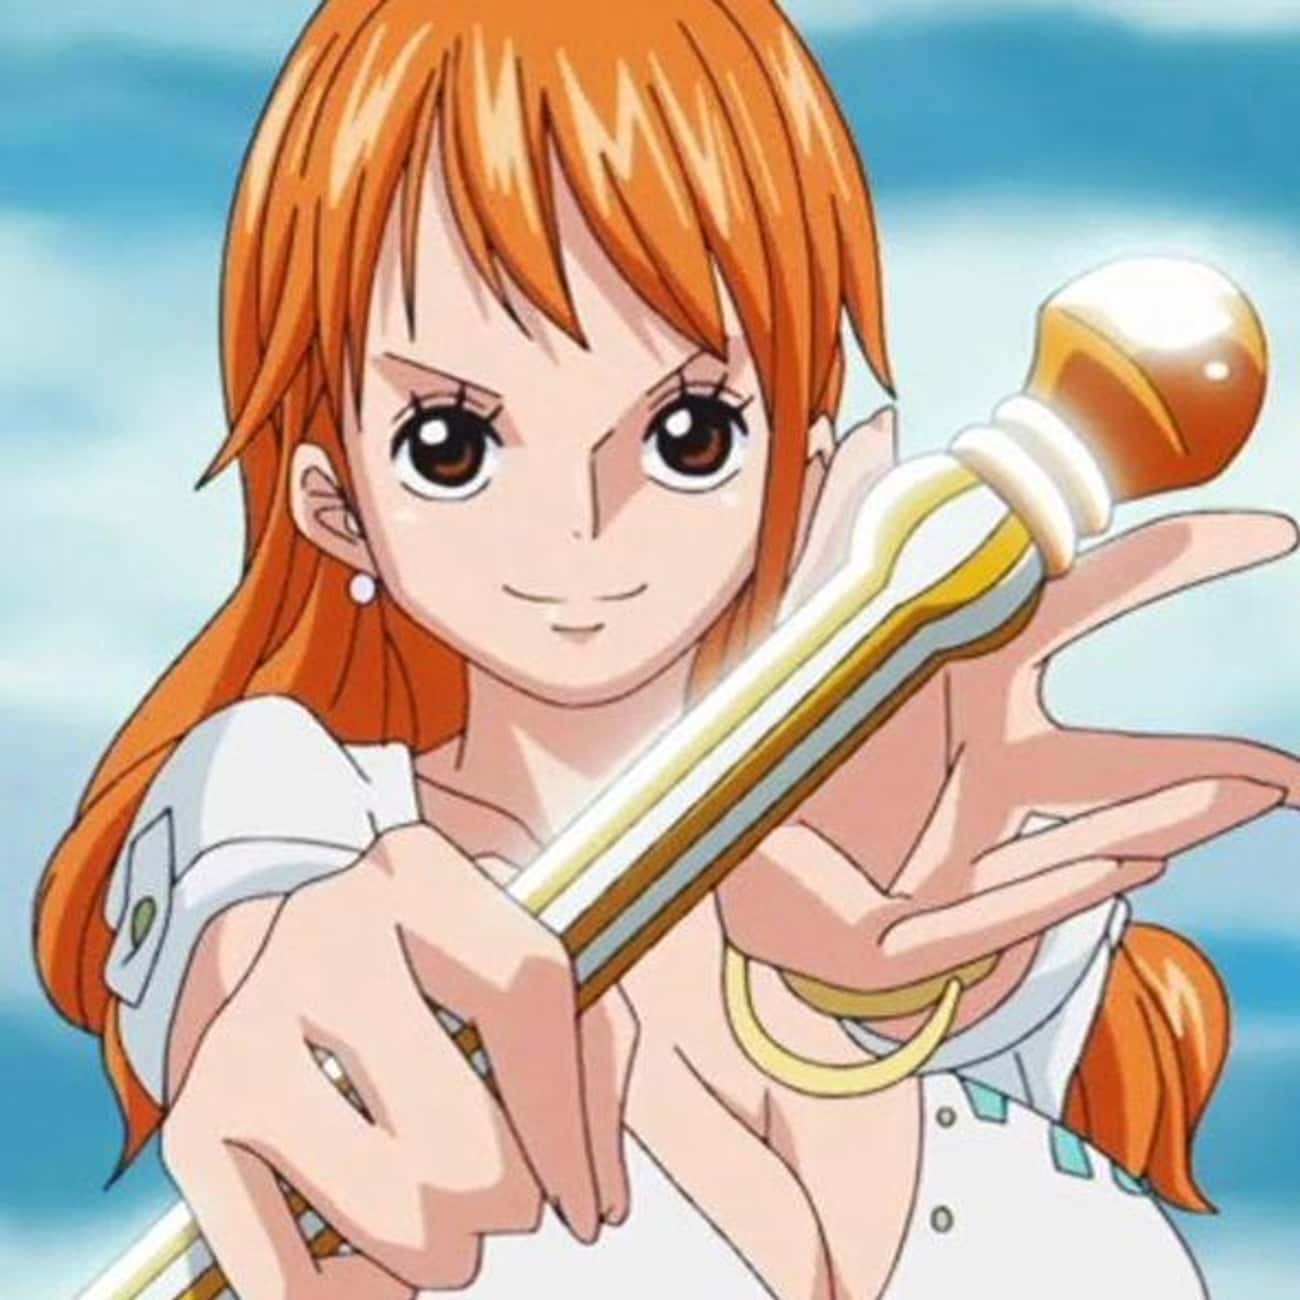 The 10+ Best Nami Quotes From One Piece (With Images)